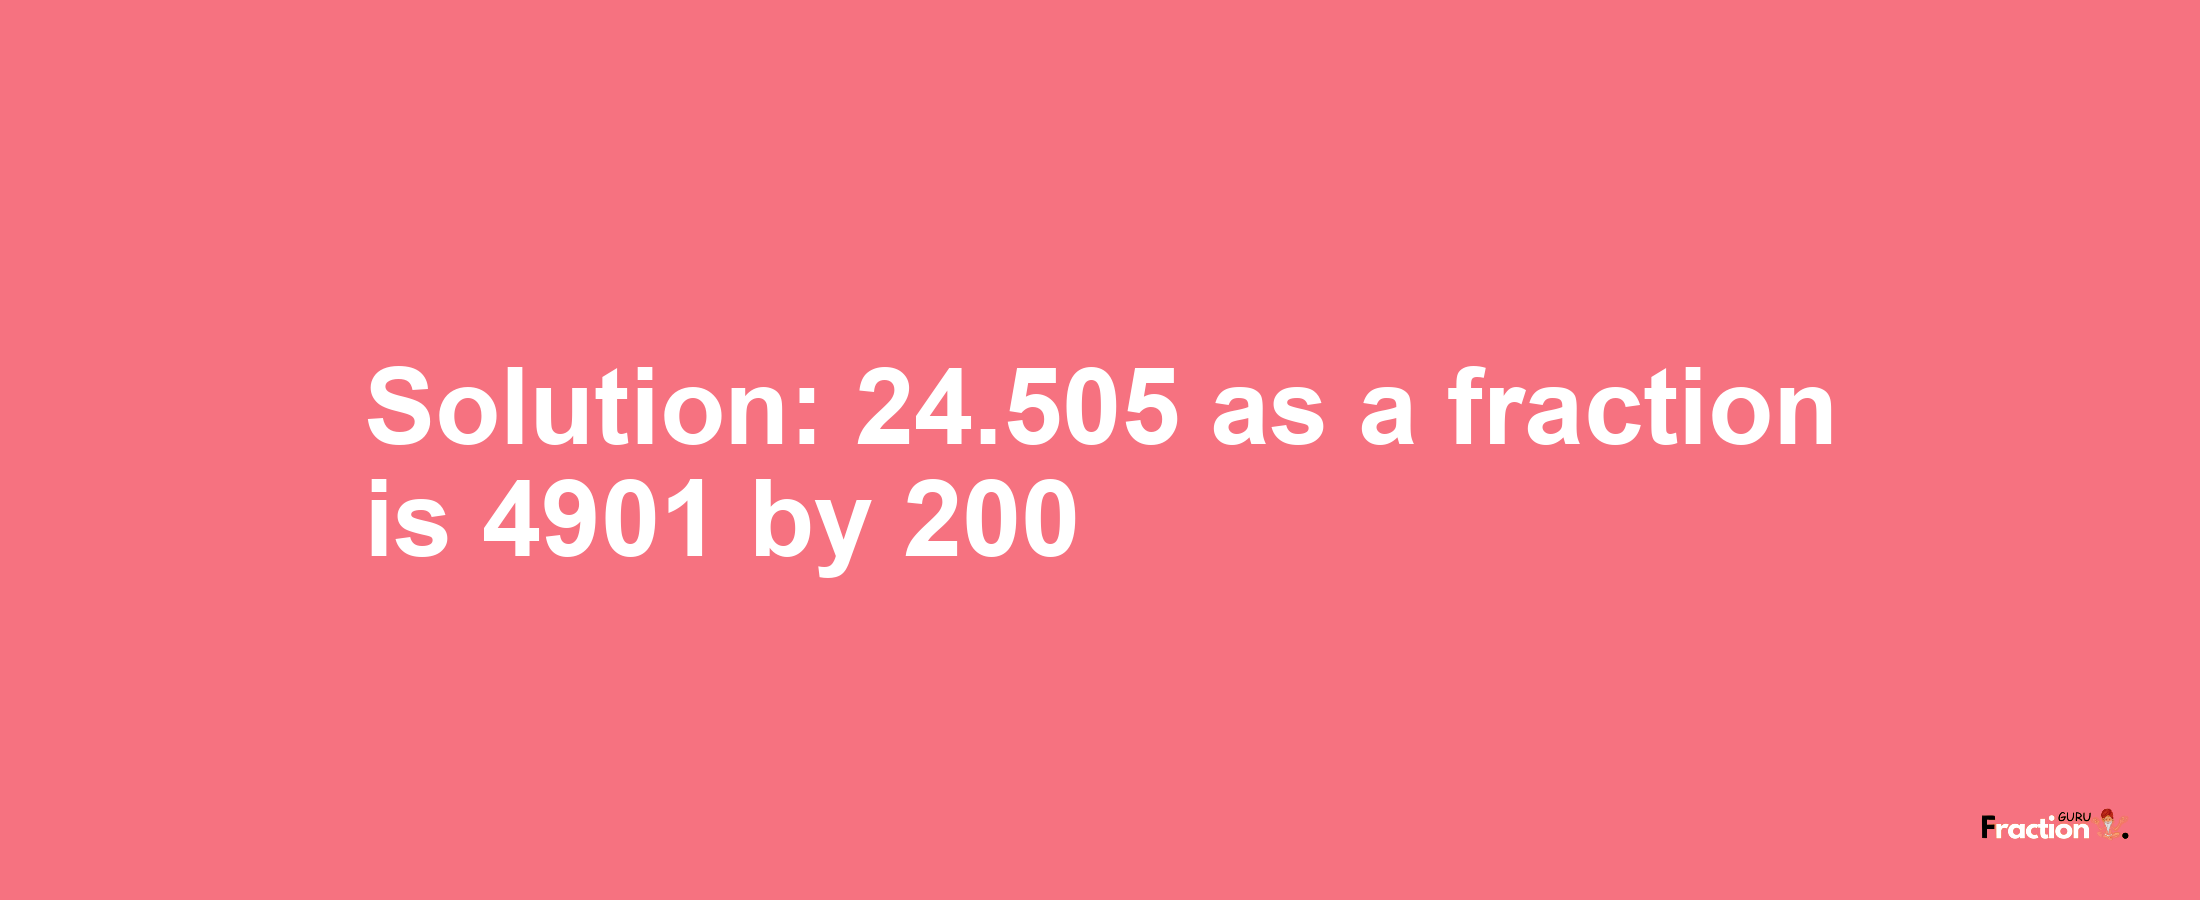 Solution:24.505 as a fraction is 4901/200